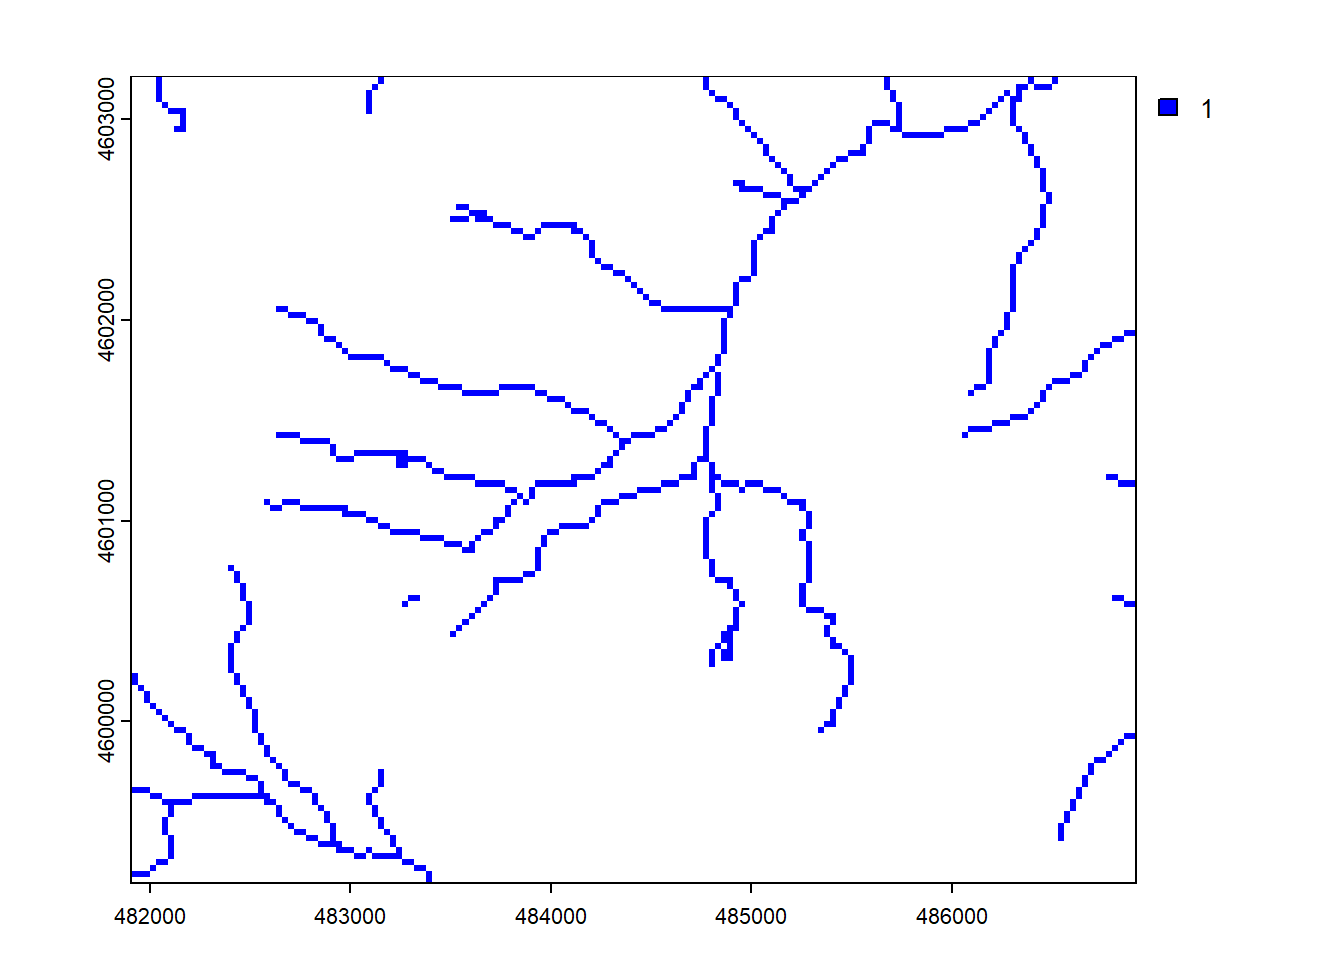 Stream raster converted from stream features, with 30 m cells from an elevation raster template